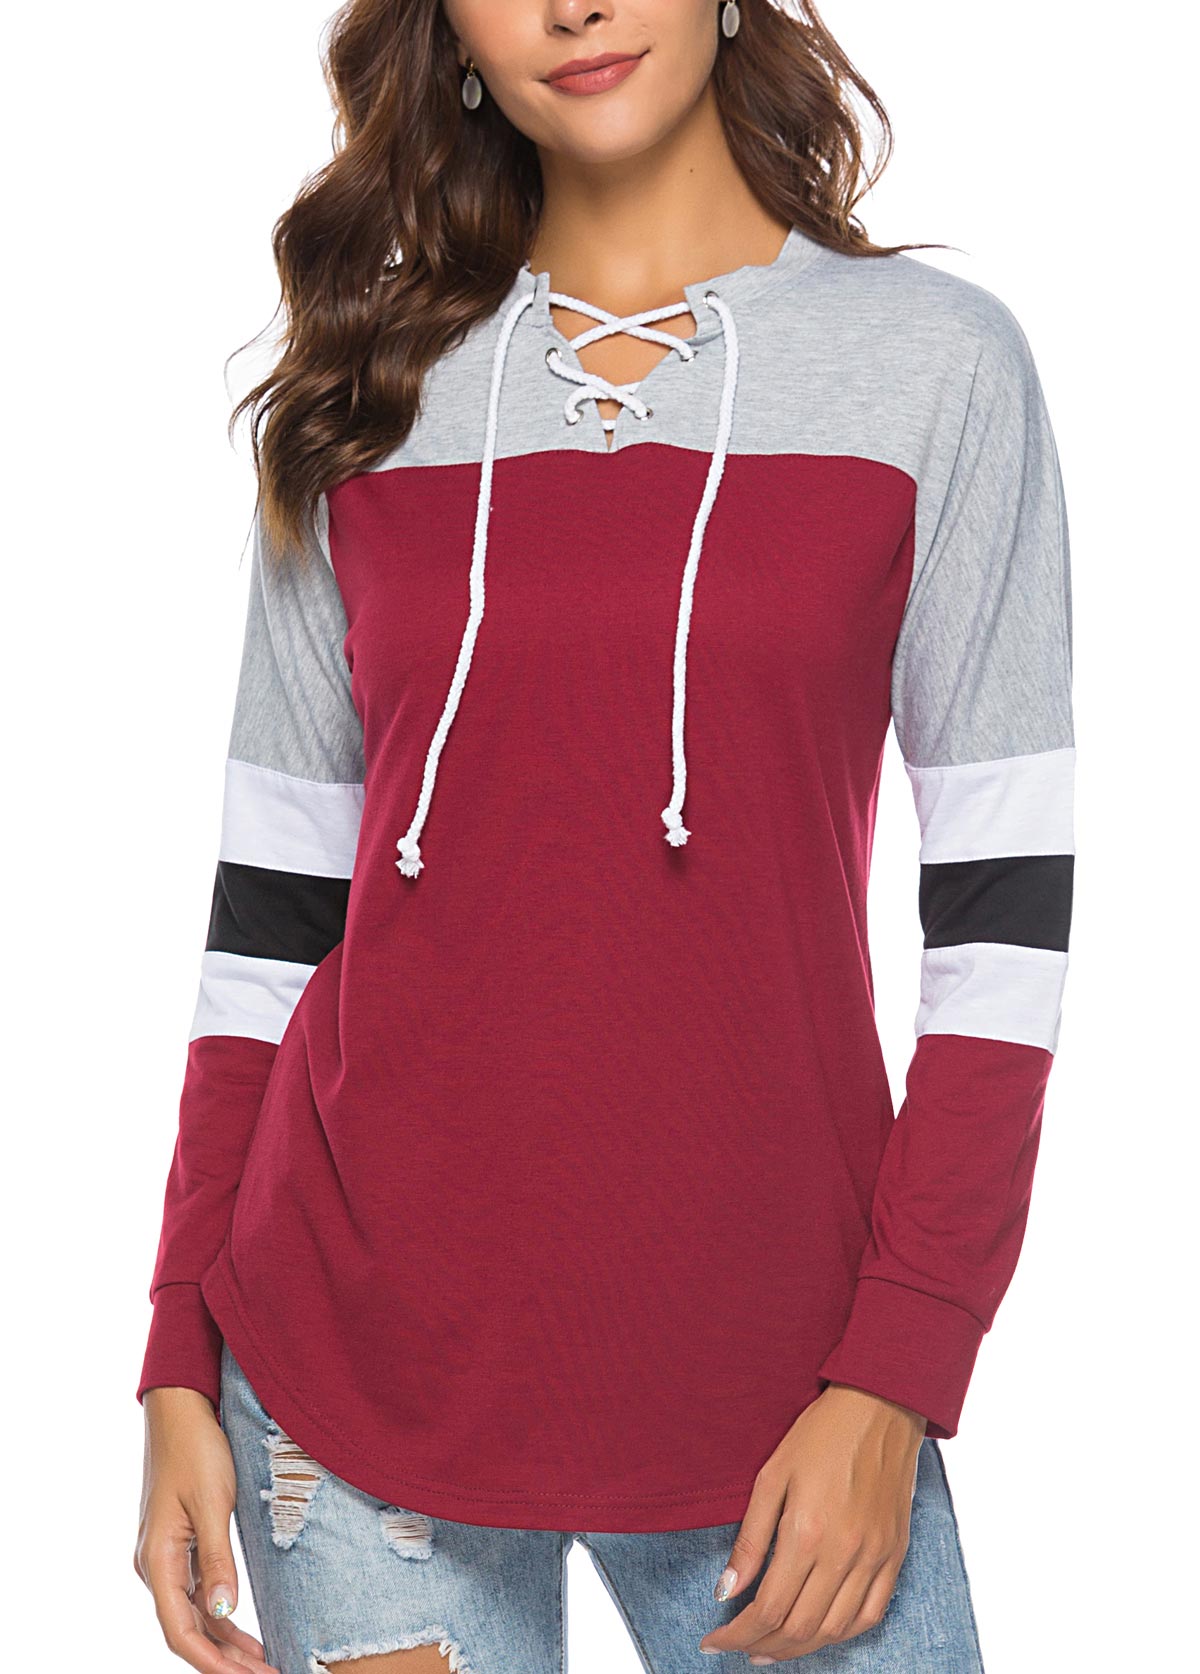 Lace Up Wine Red Contrast Long Sleeve T Shirt